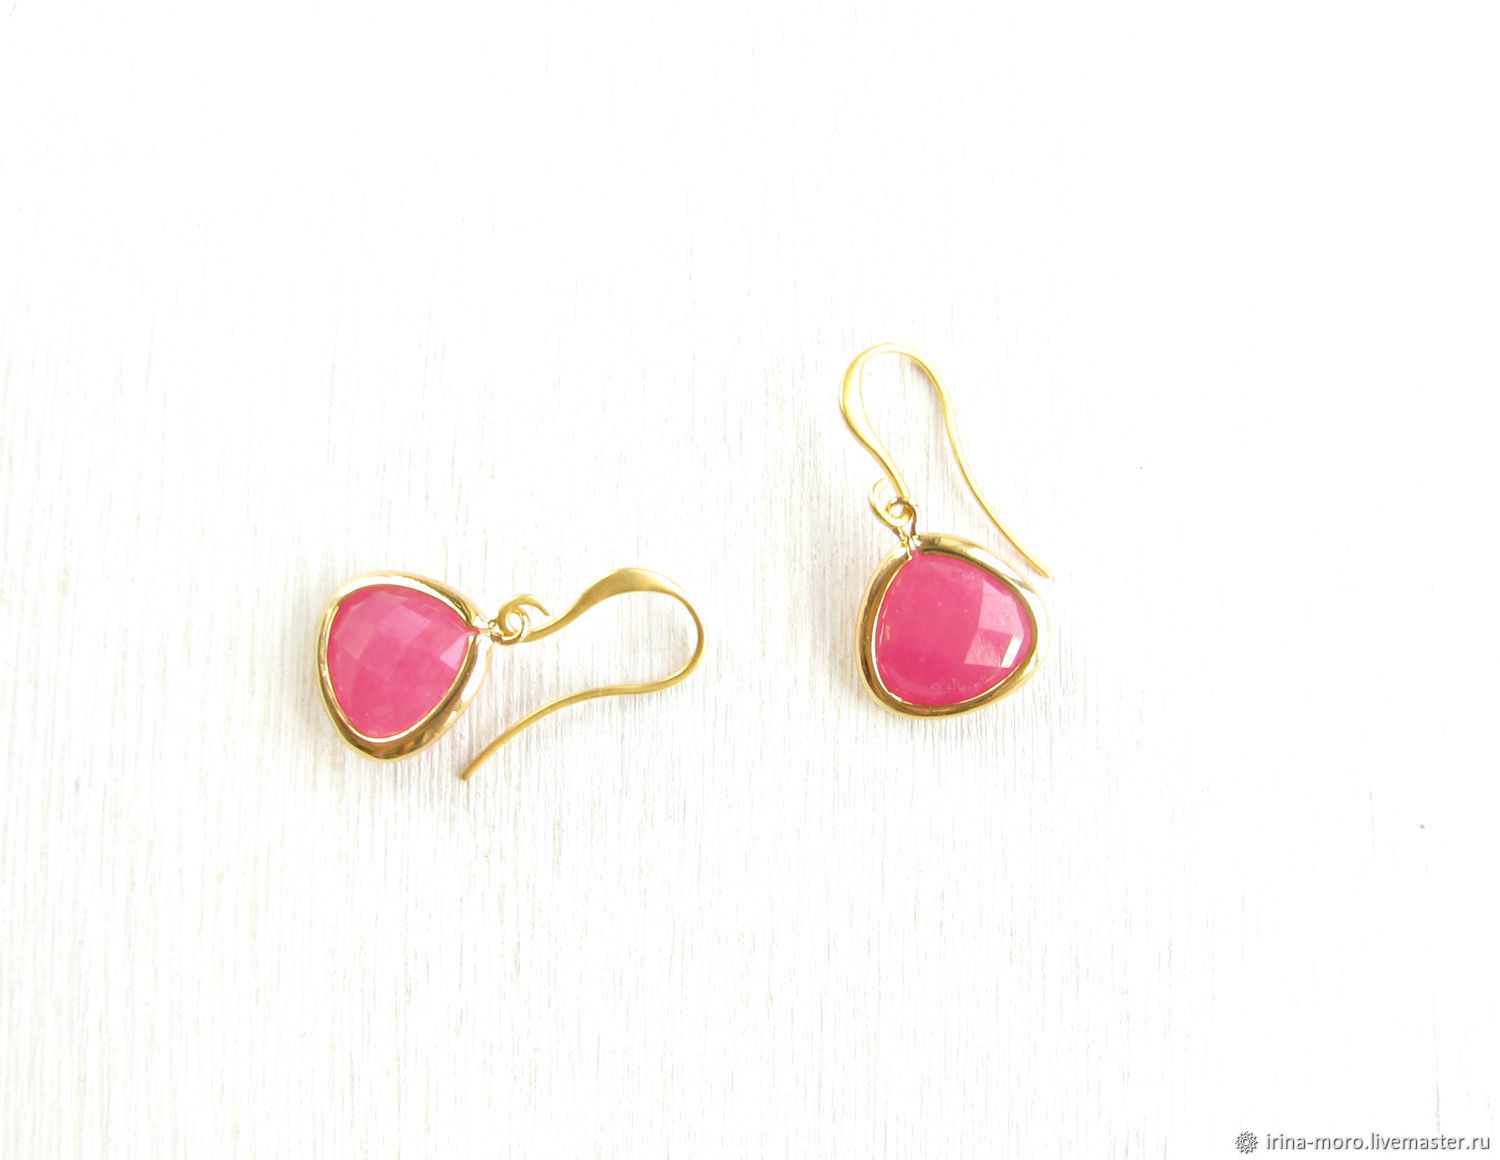 Earrings with pendants 'Paradox' small earrings, bright pink, Earrings, Moscow,  Фото №1